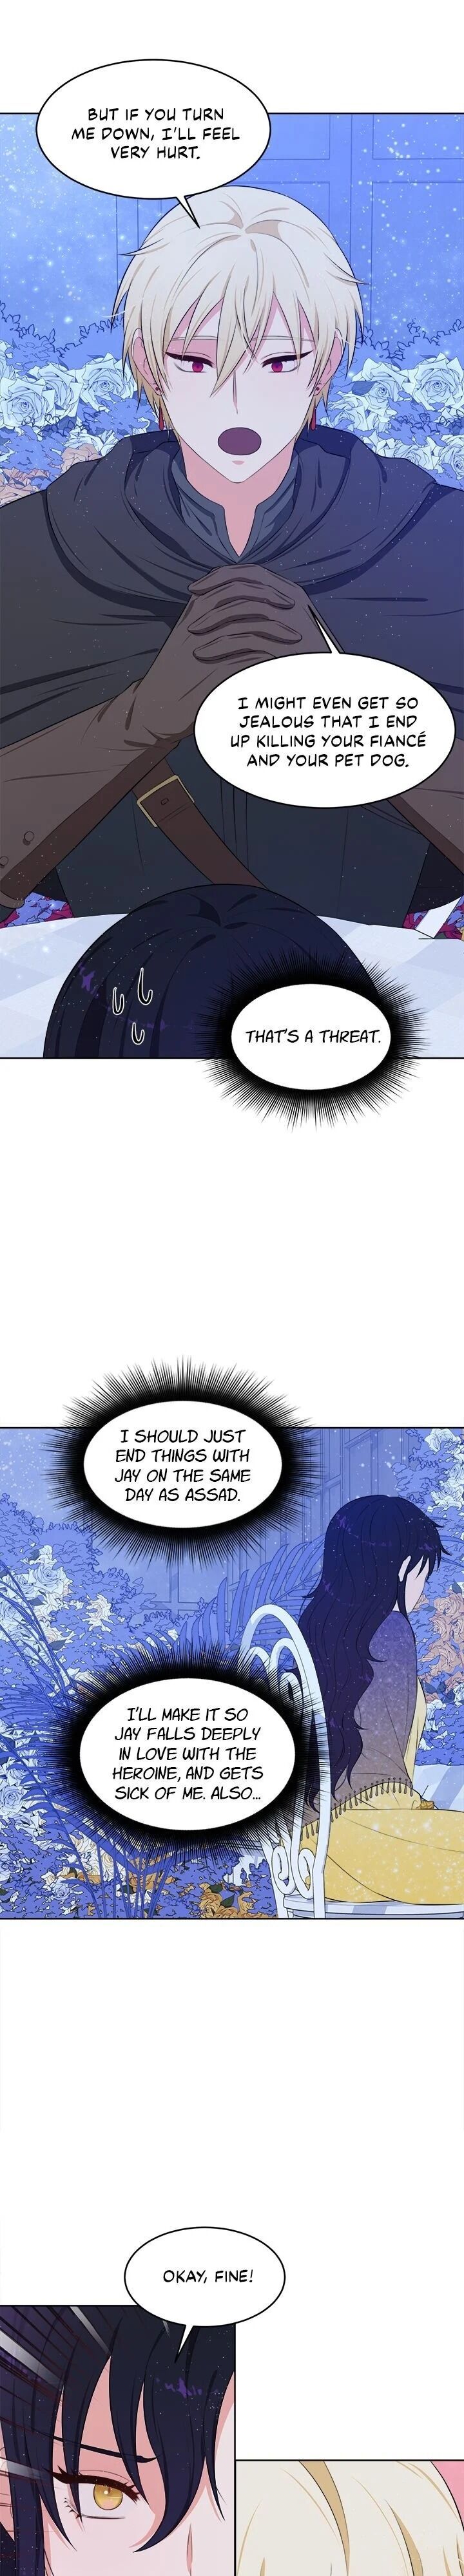 Wish to Say Farewell Ch.015 page 14 - MangaWeebs.in